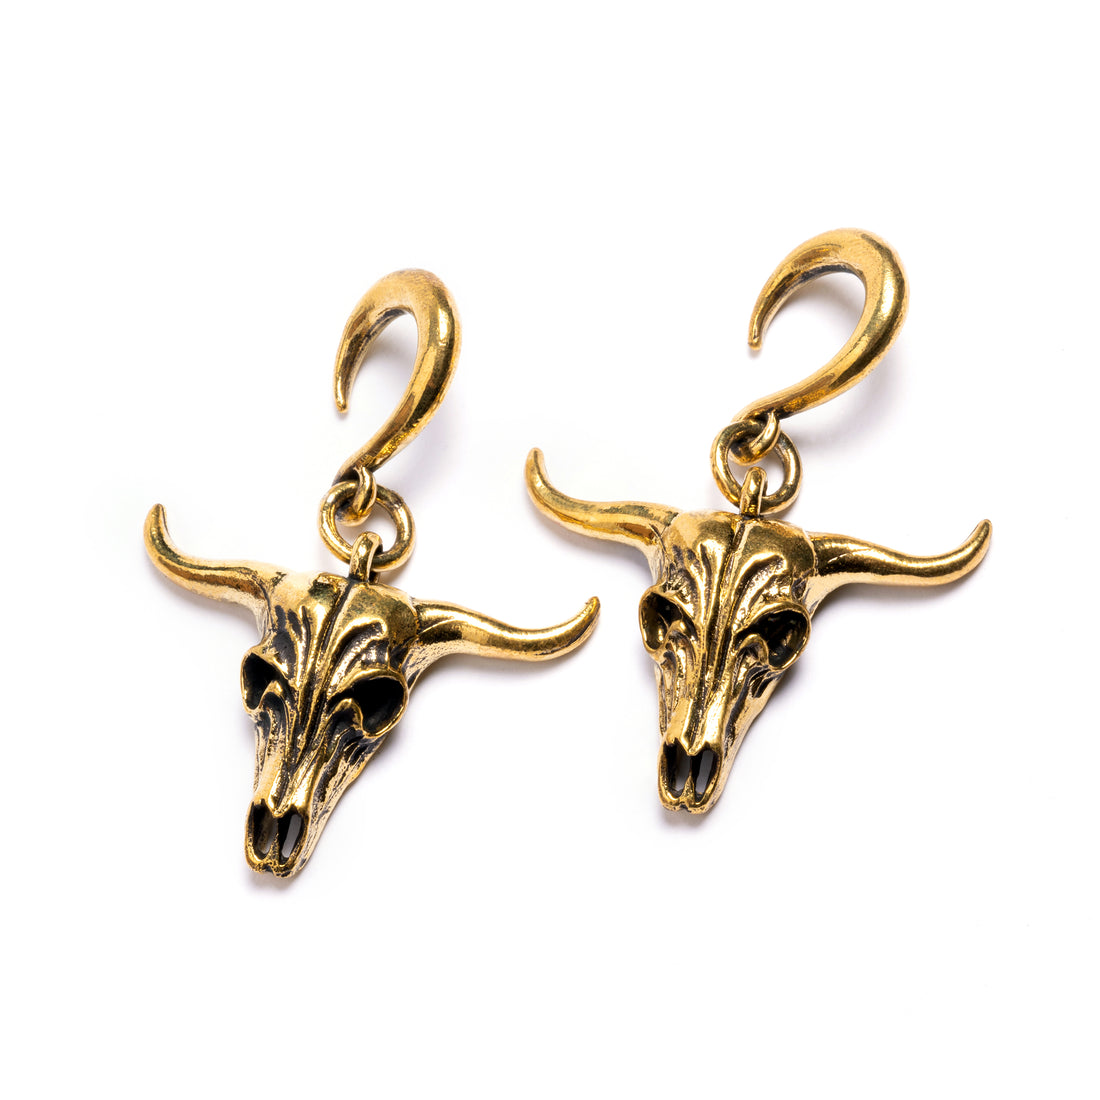 pair of gold brass longhorn skull ear weights hangers frontal view